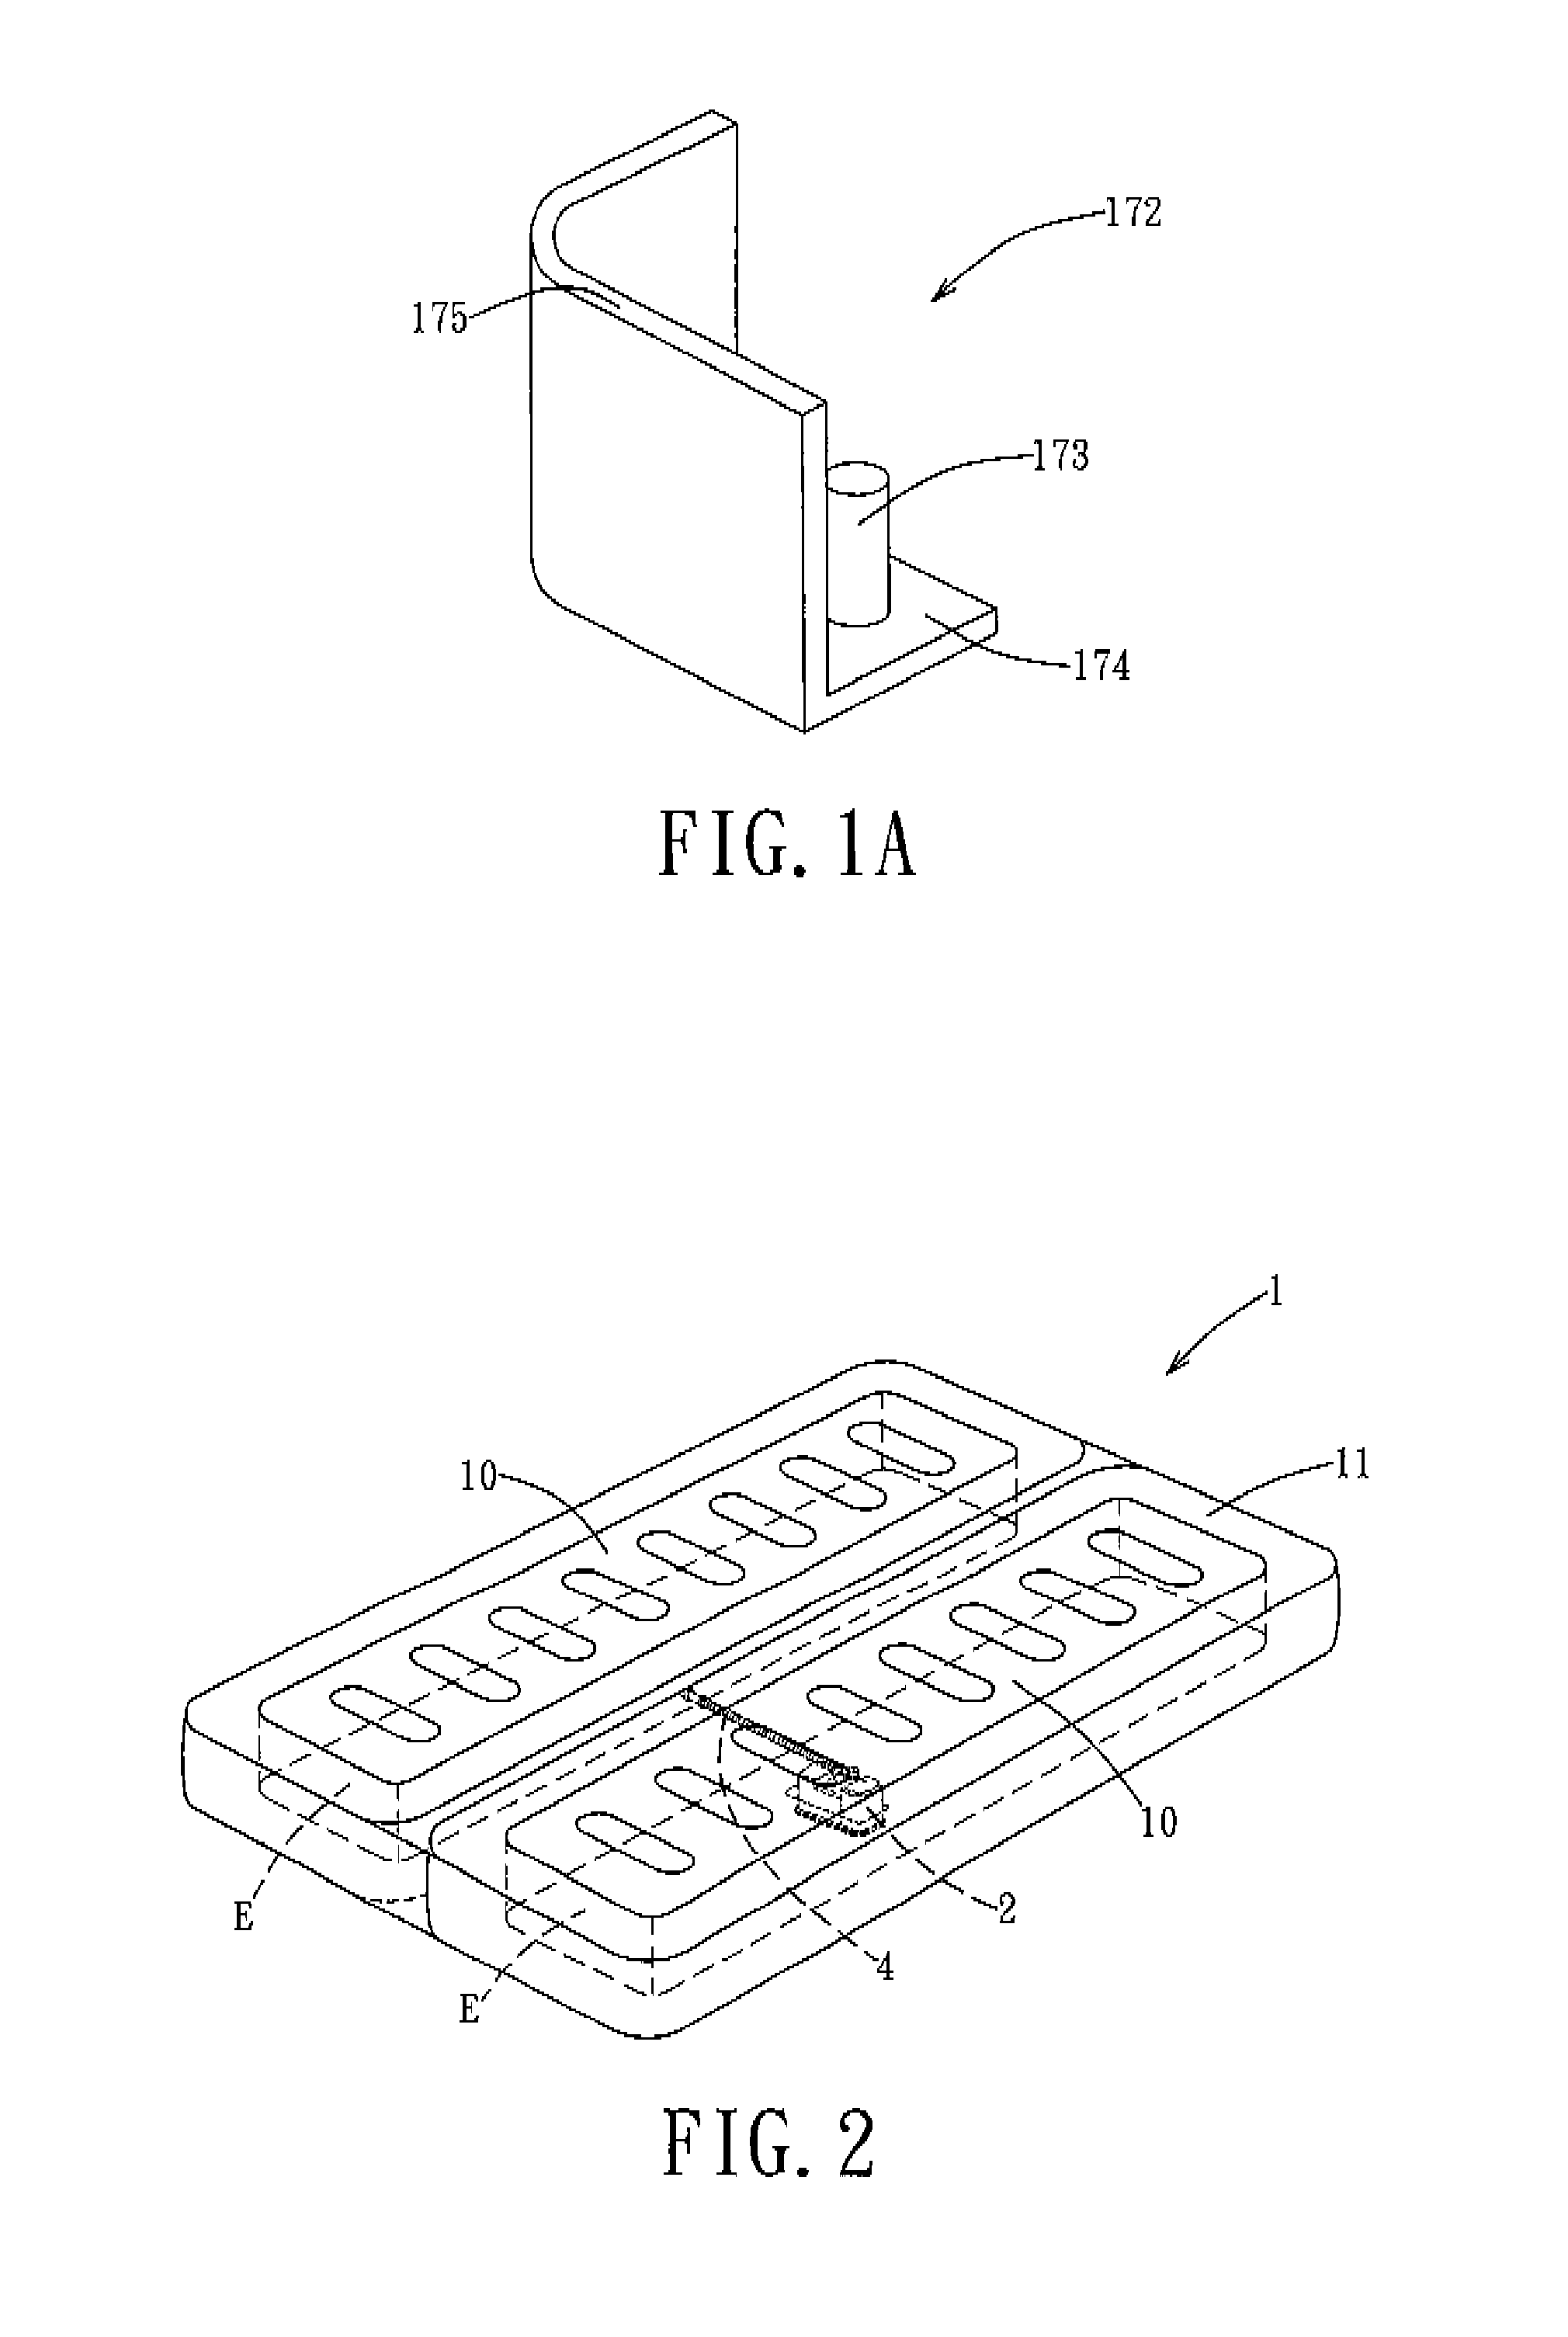 Inflatable bed having a built-in electric air pump unit for inflating a mattress assembly